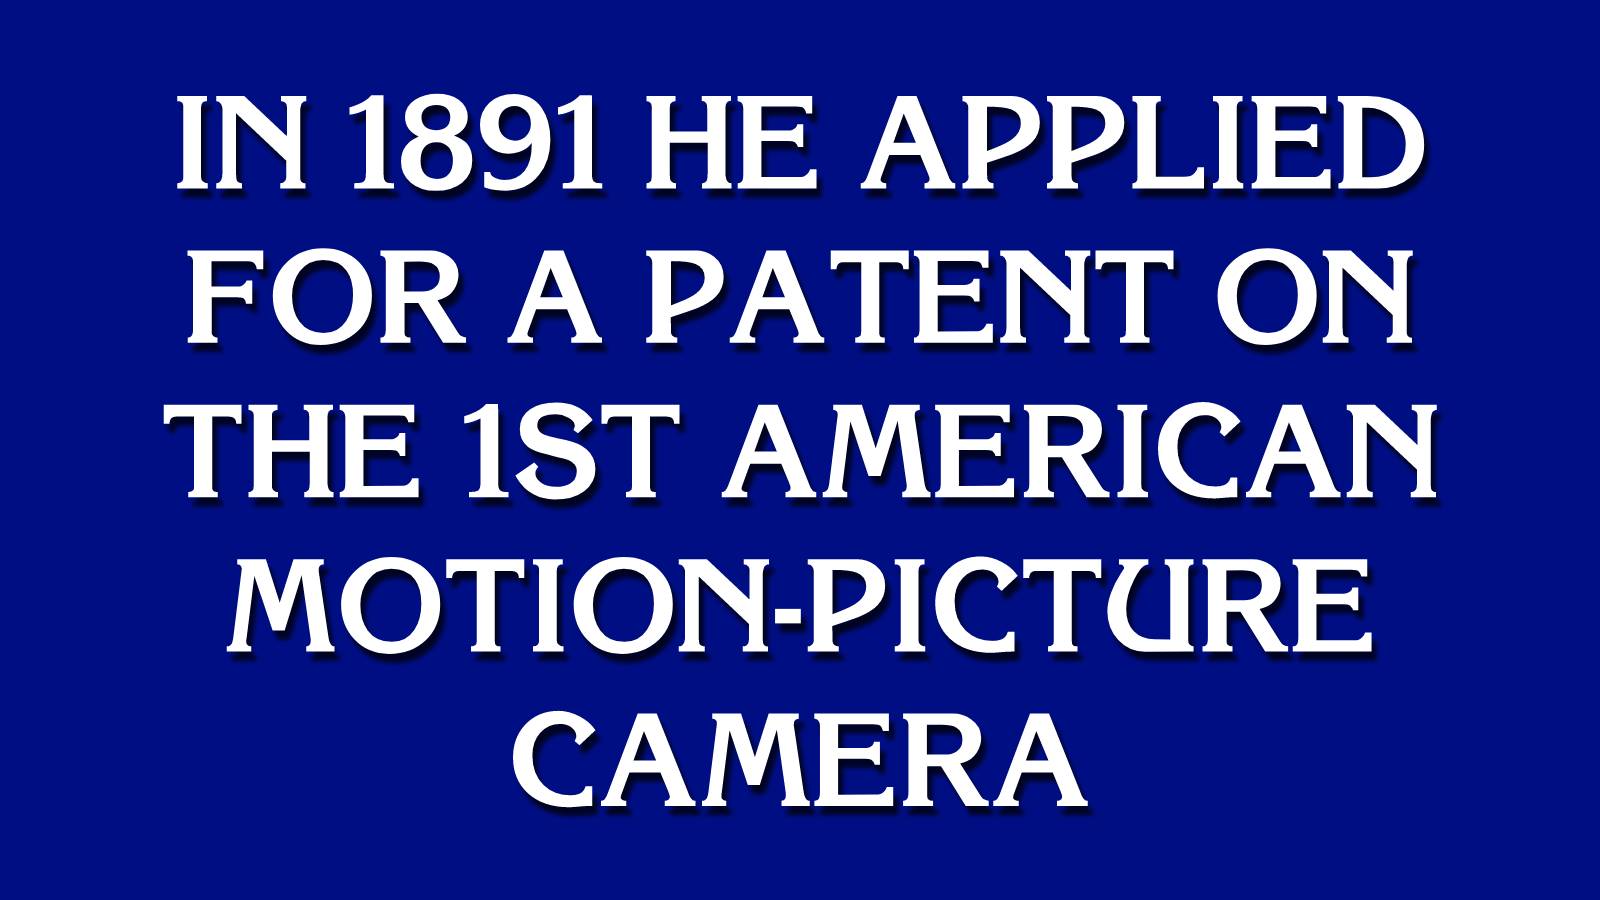 Do You Have the Smarts to Win This Game of “Jeopardy!”? Template Jeopardy 21